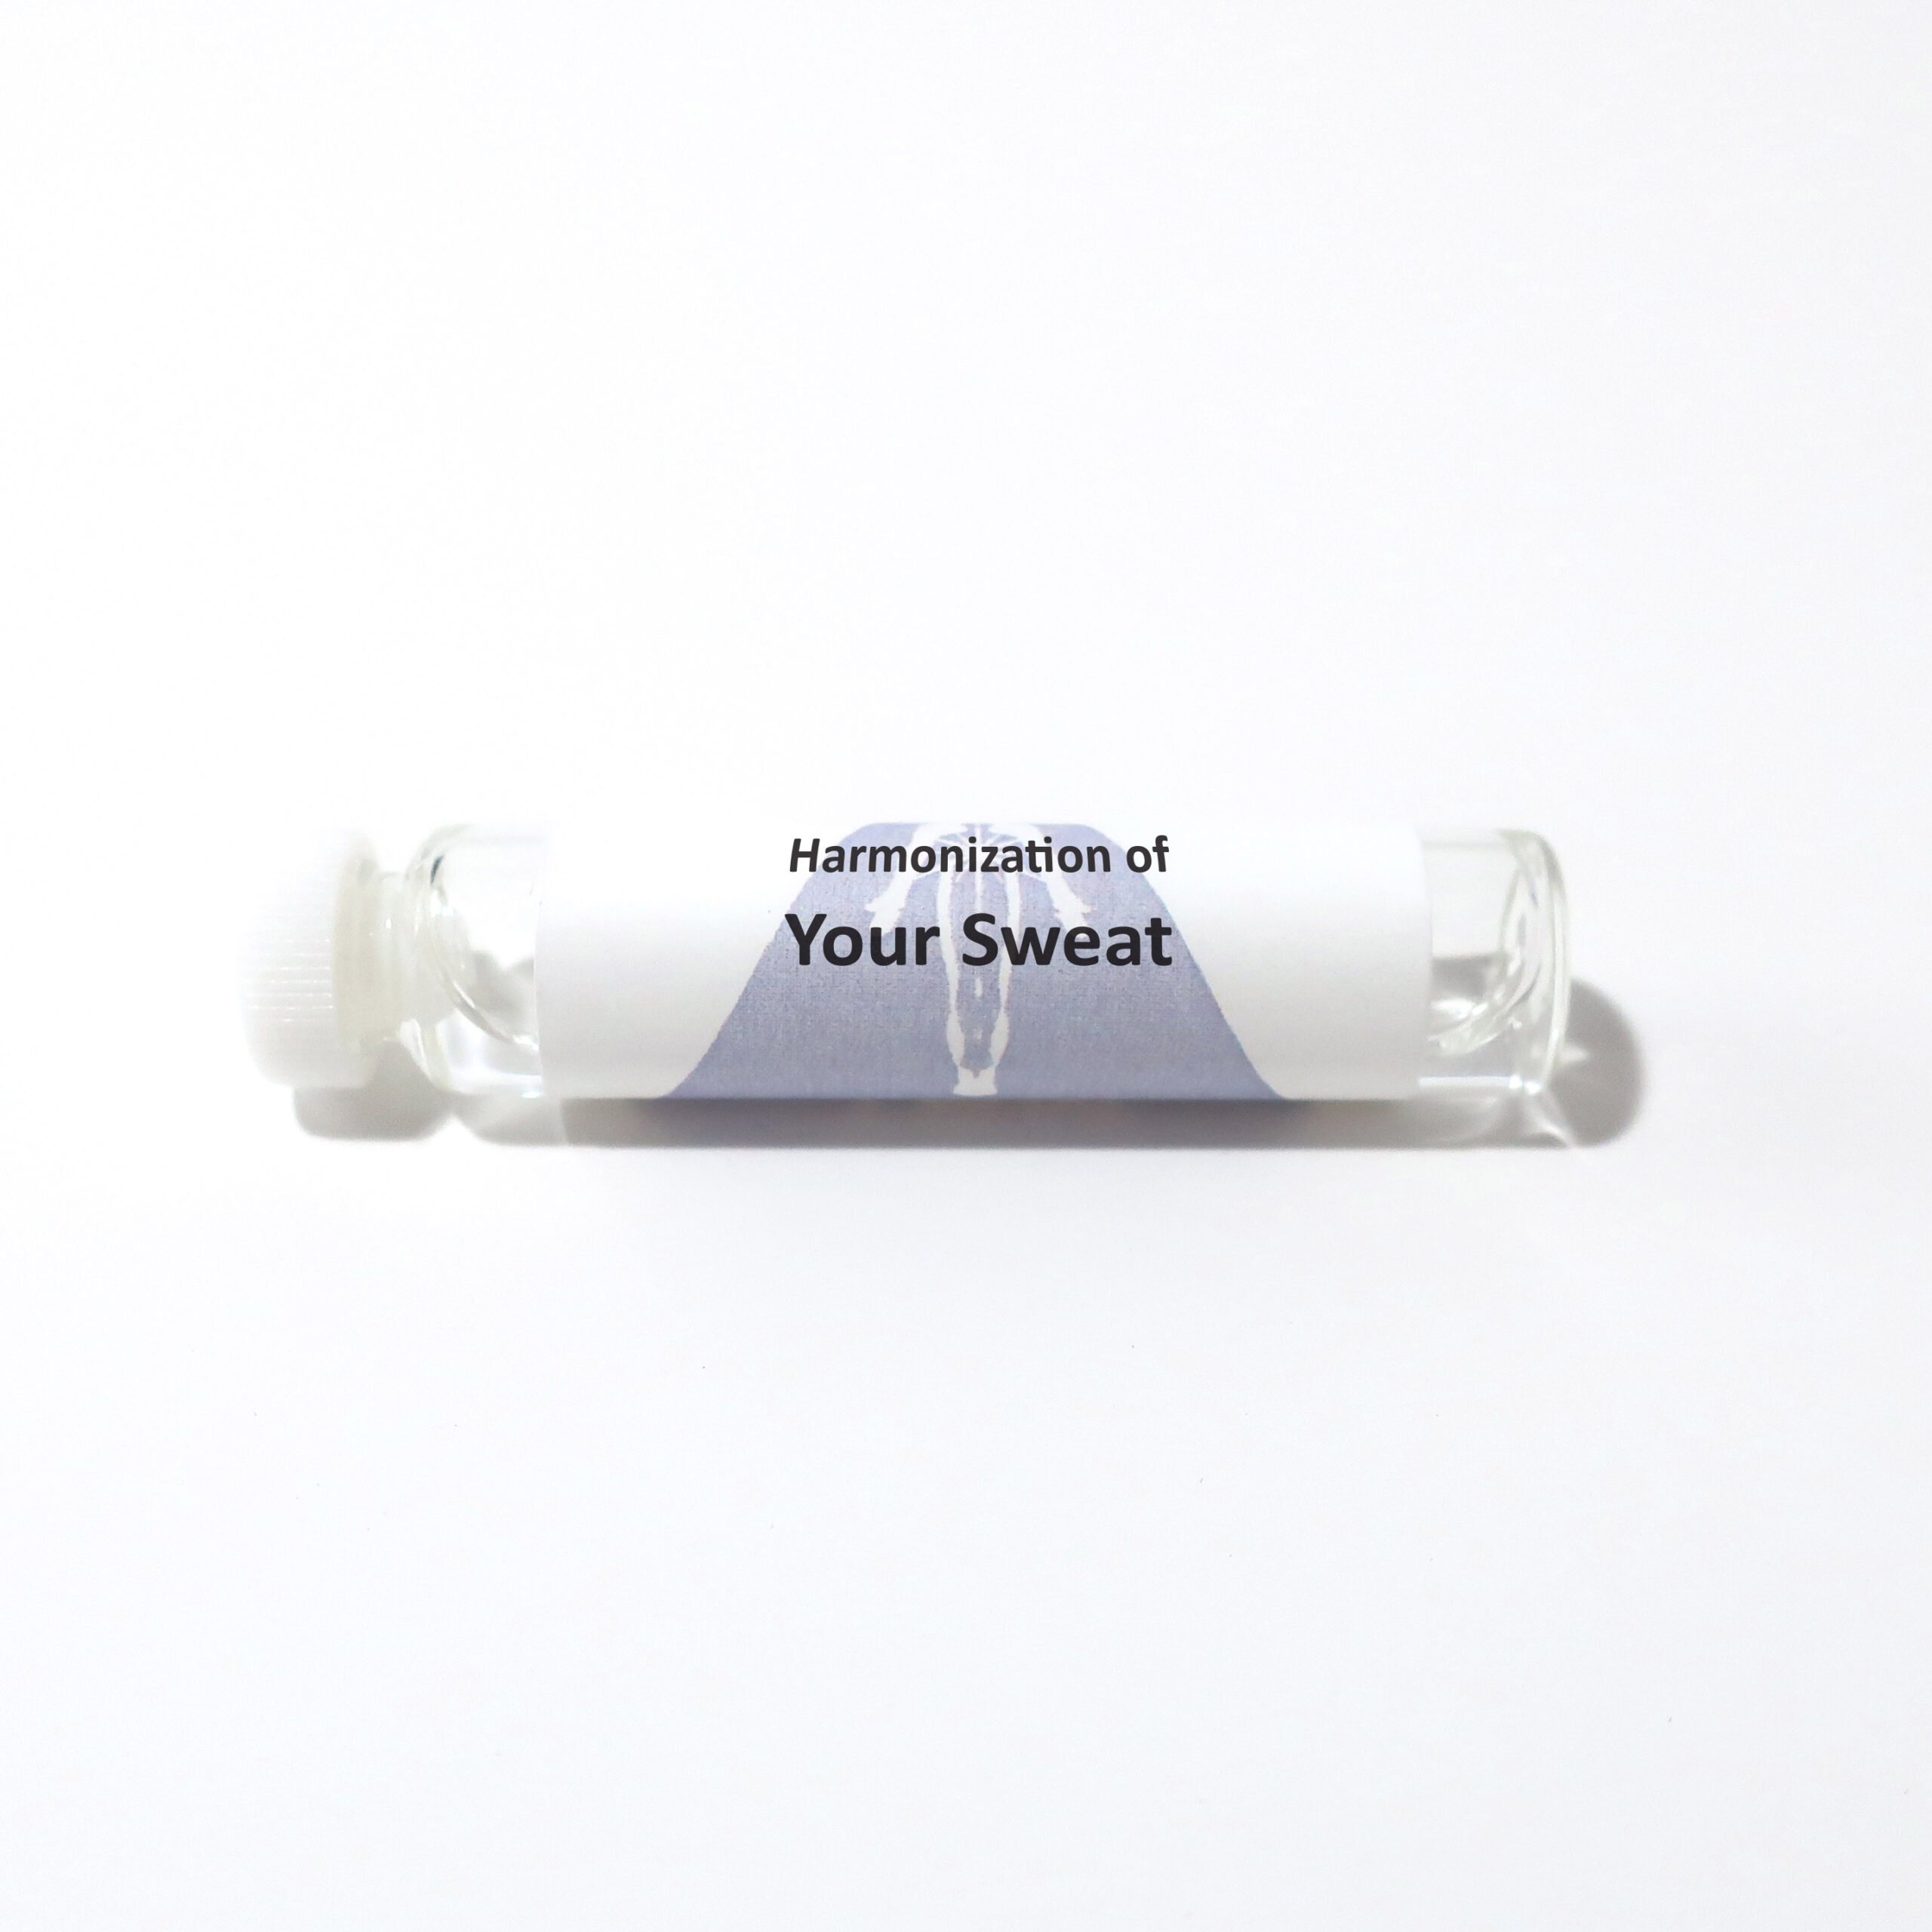 Your Sweat